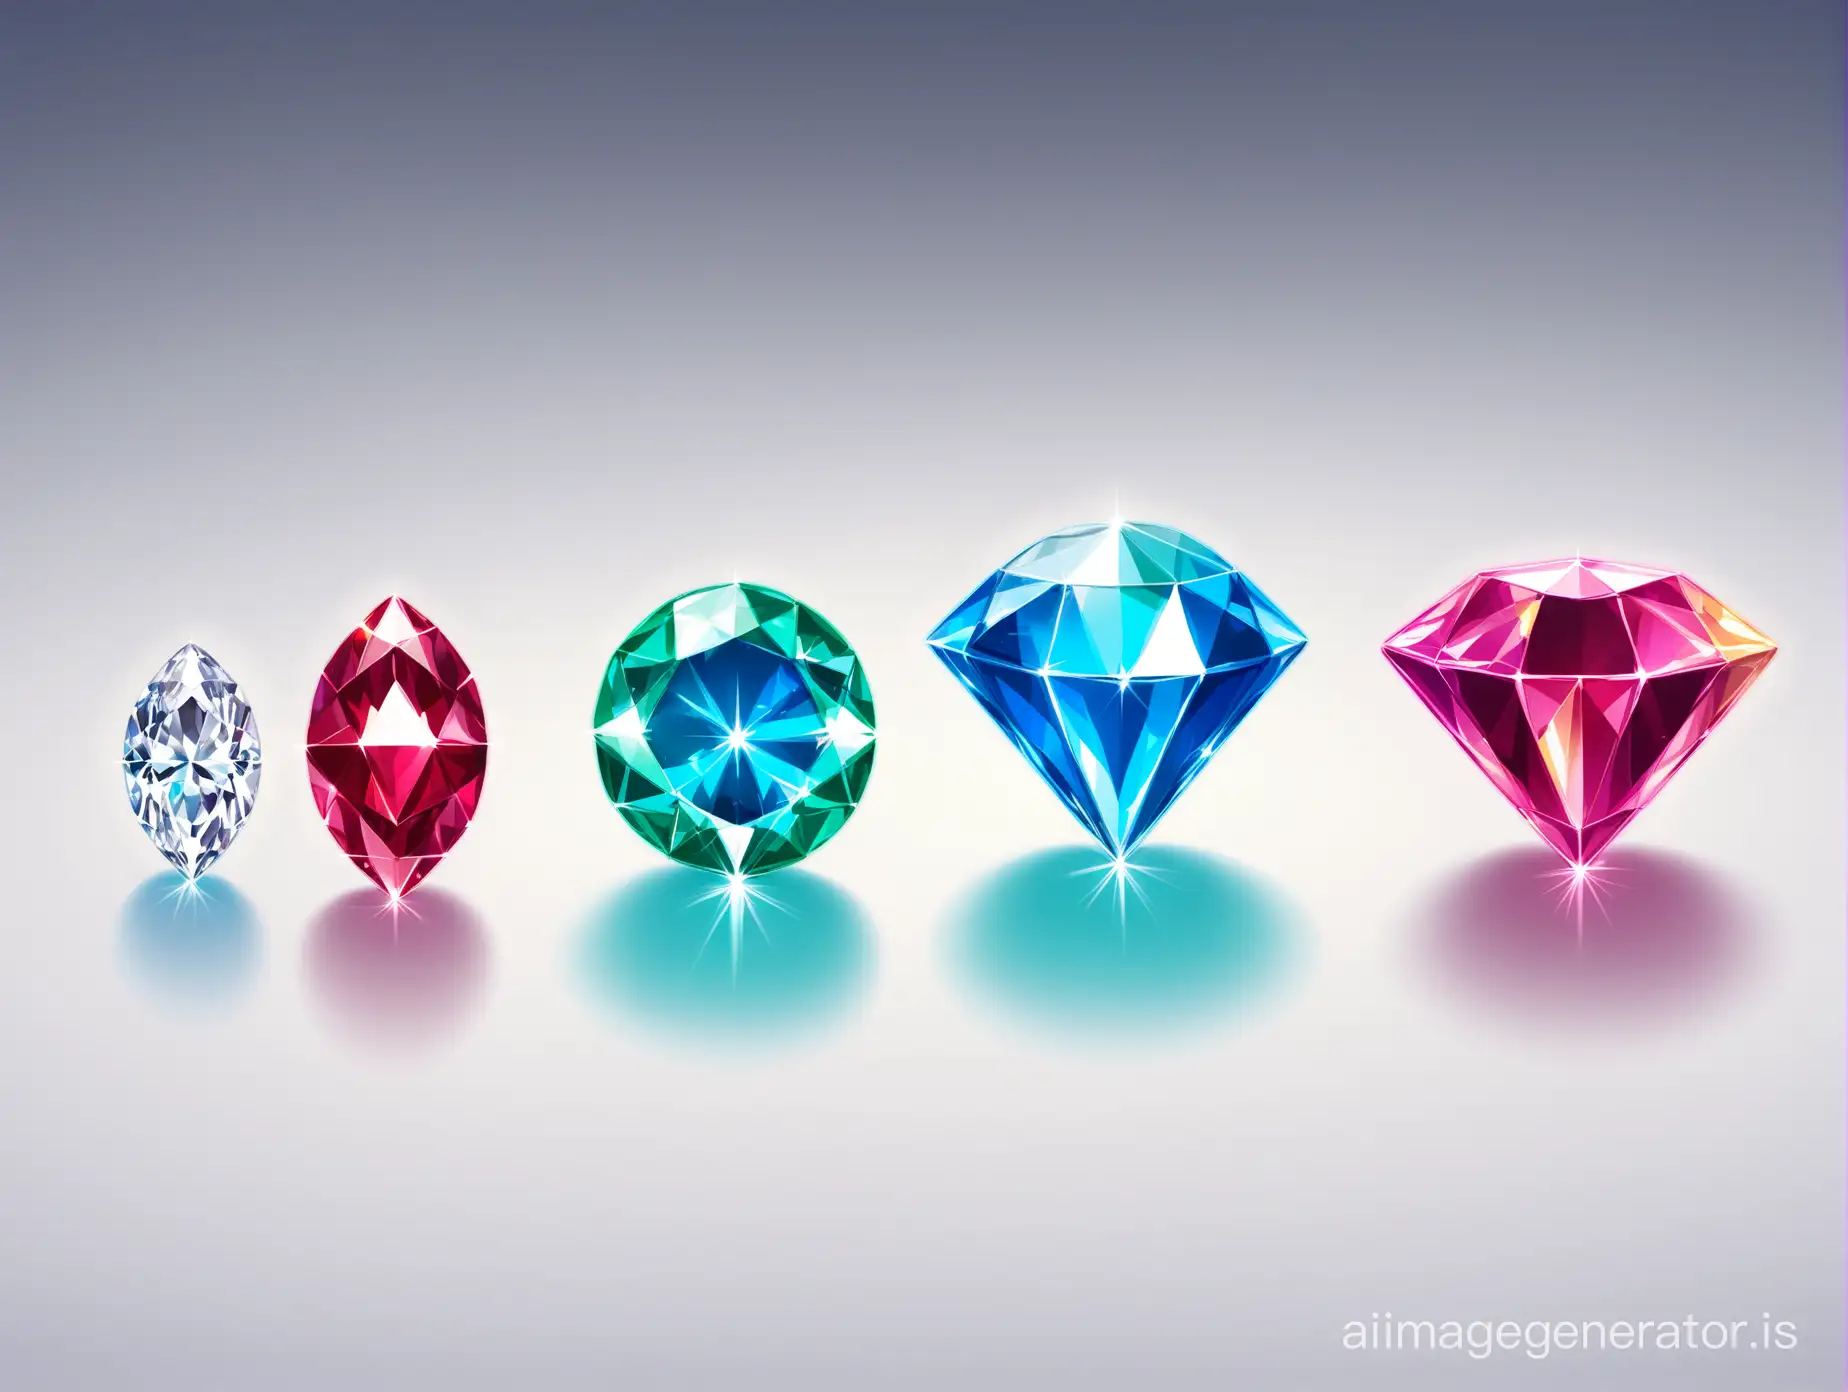 3 jewels of different shapes